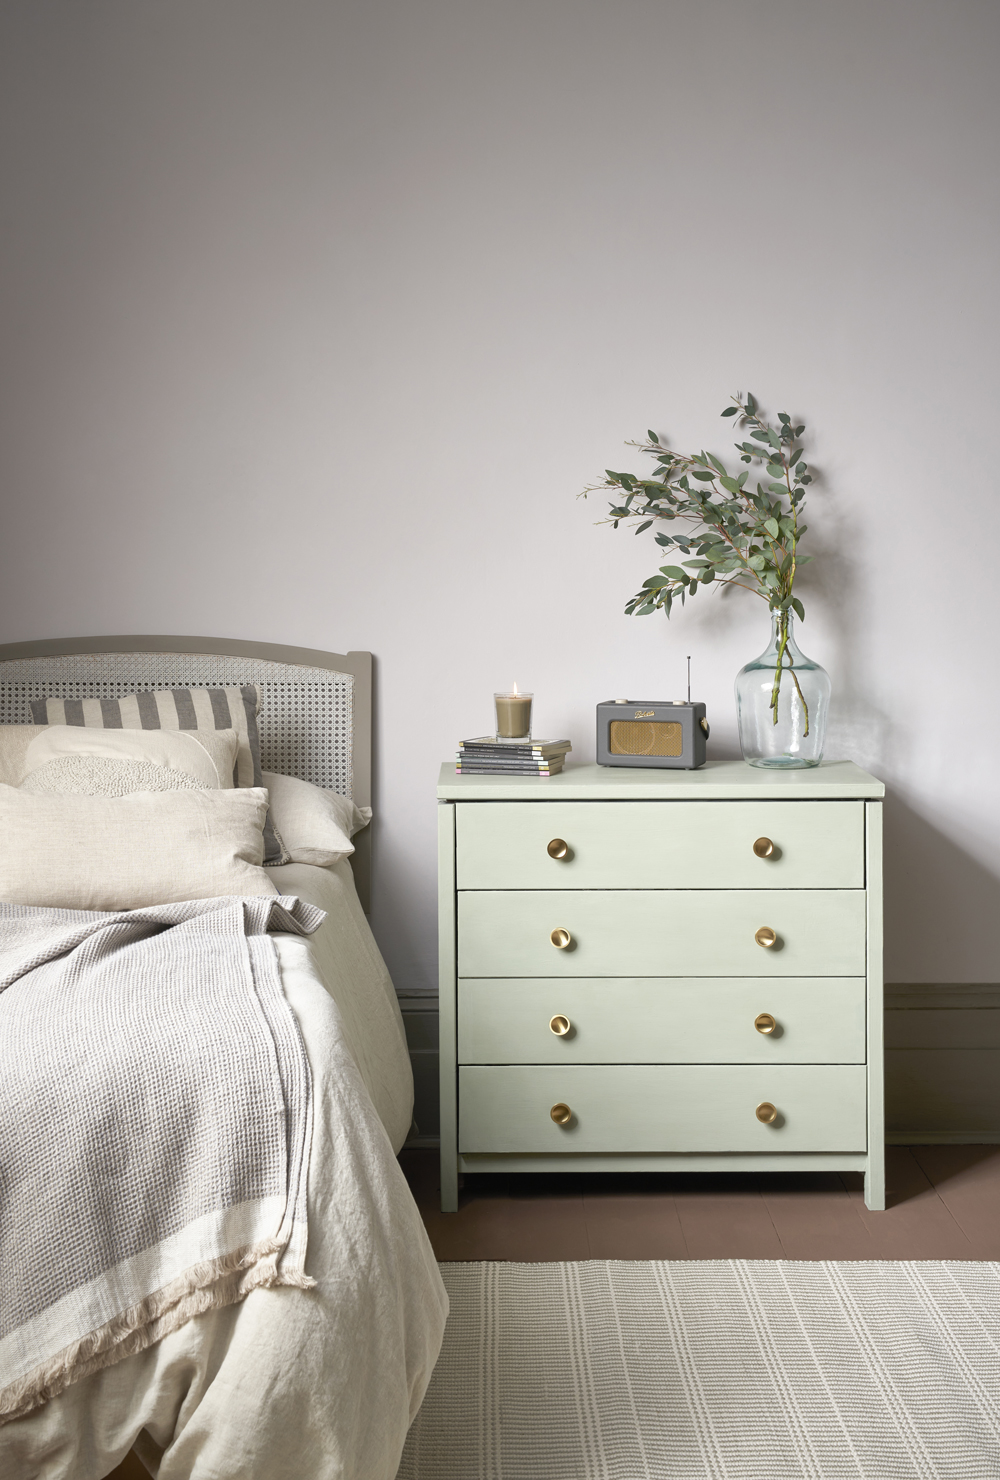 Lifestyle Image of Coolabah Green Chalk Painted Chest of Drawers in Minimal, Contemporary Bedroom